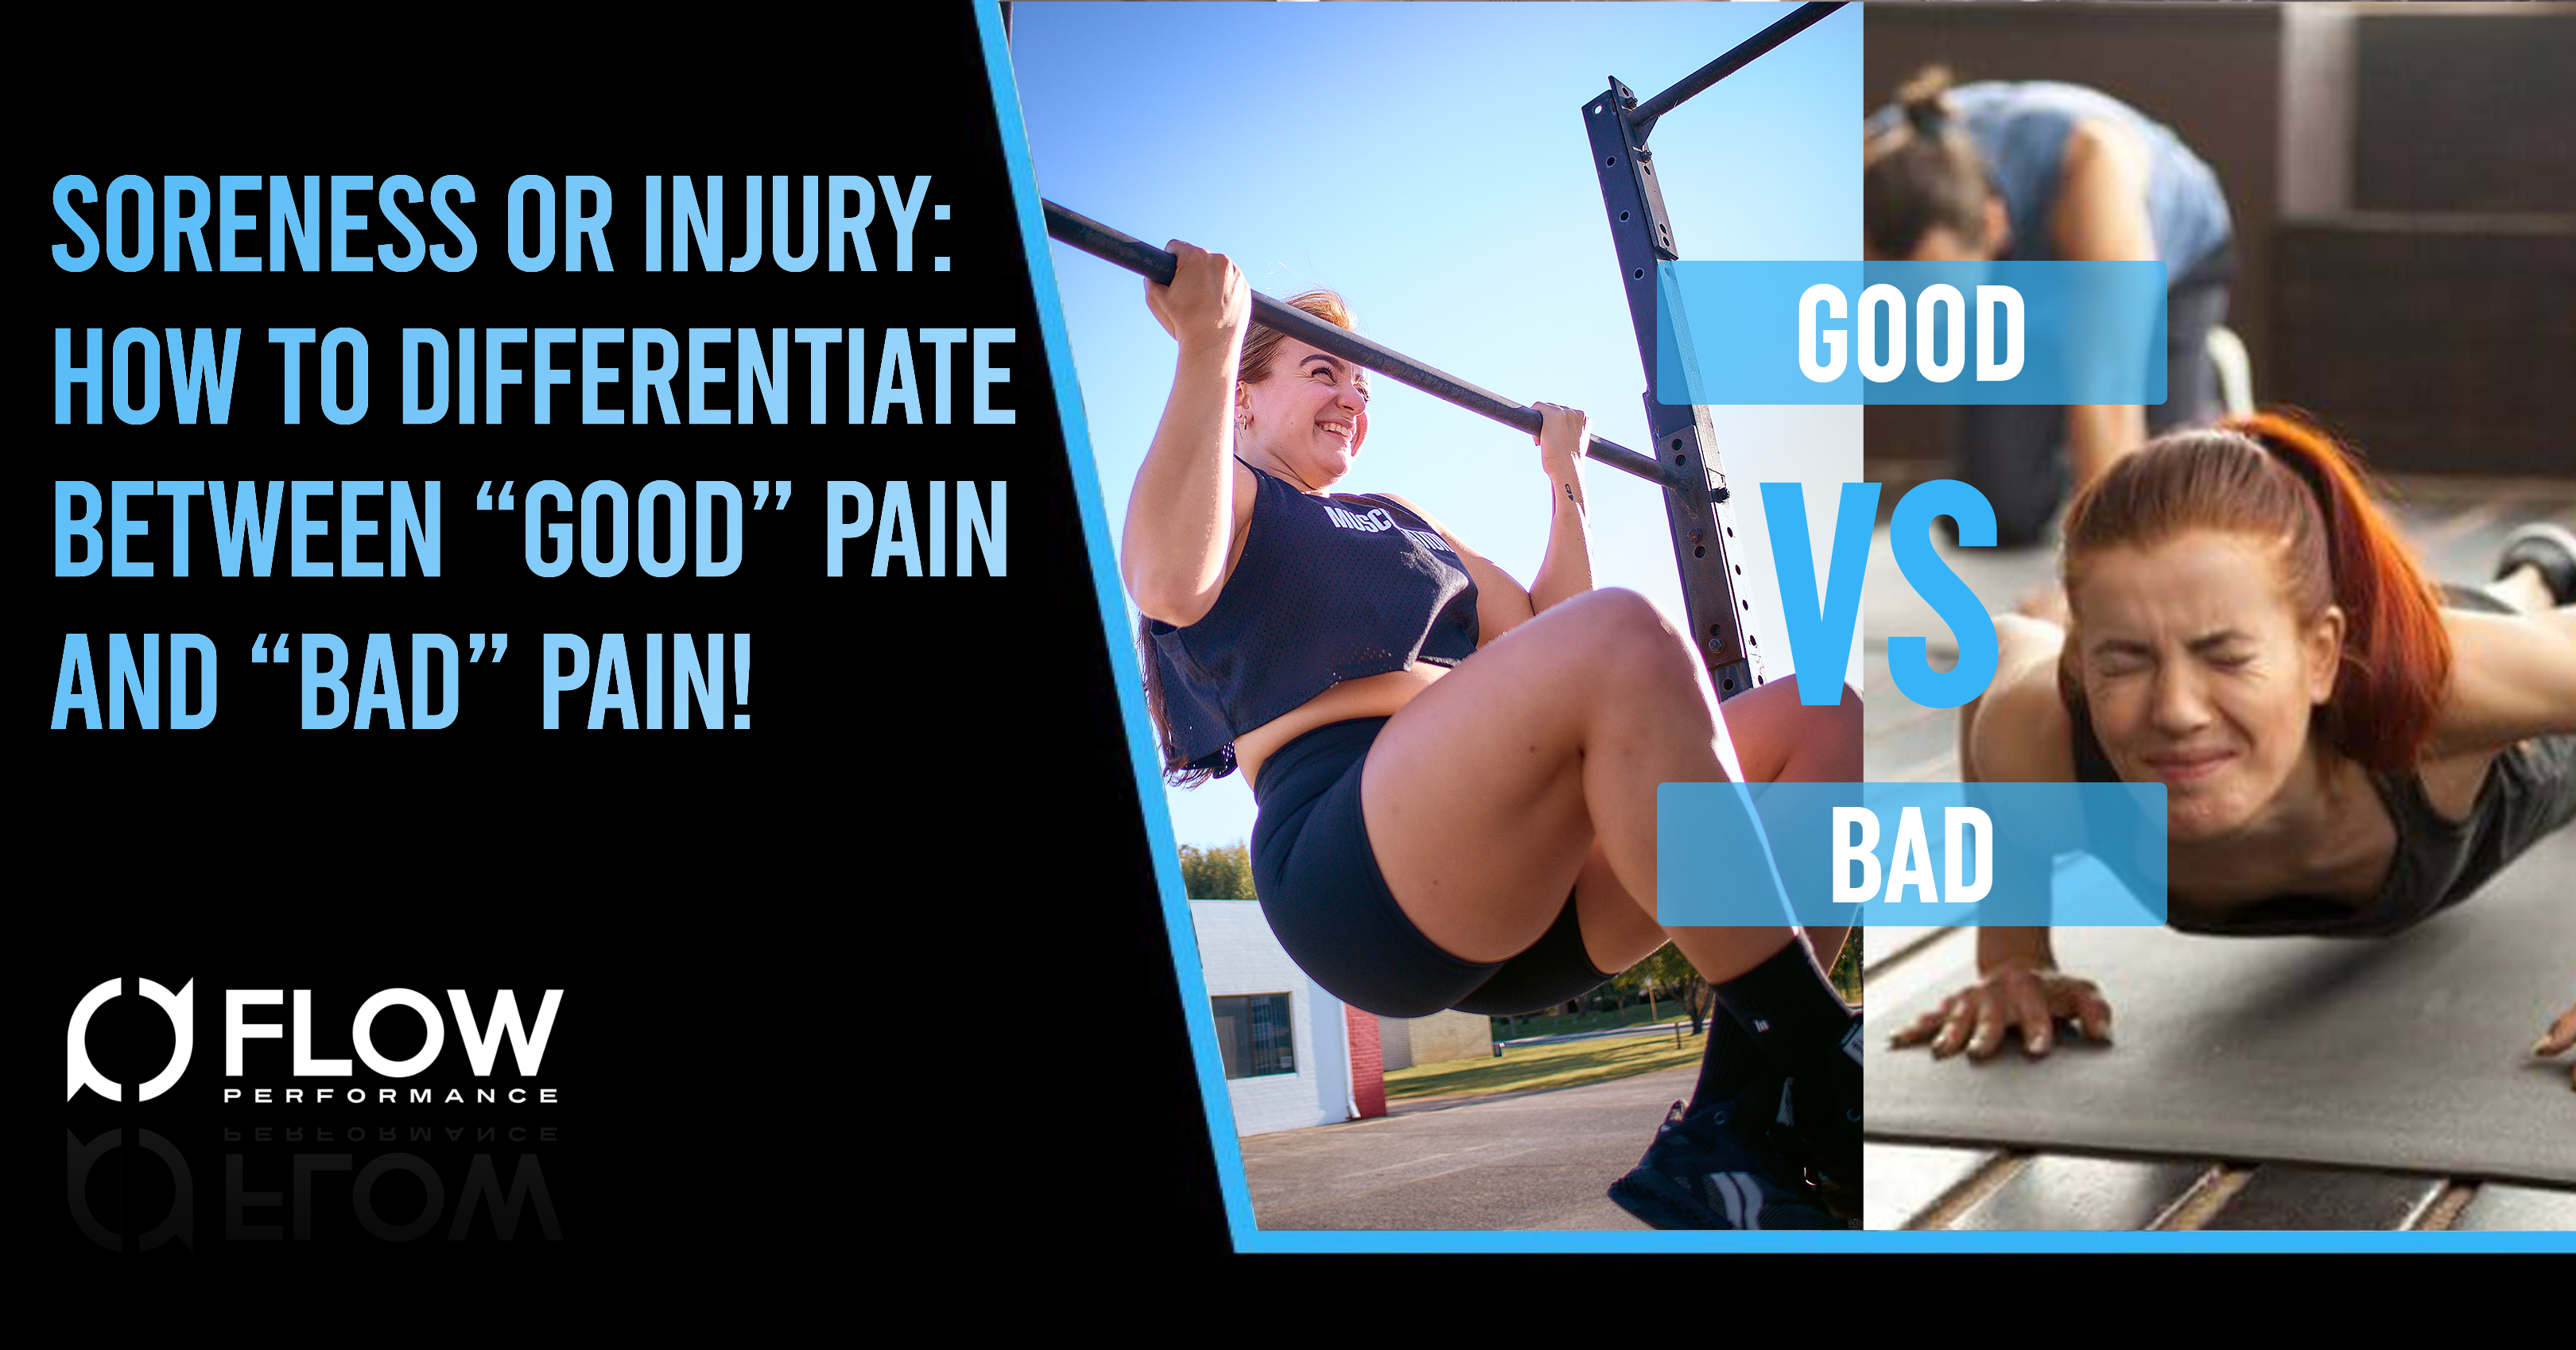 You are currently viewing Soreness or Injury: How to differentiate between “good” pain and “bad” pain!￼